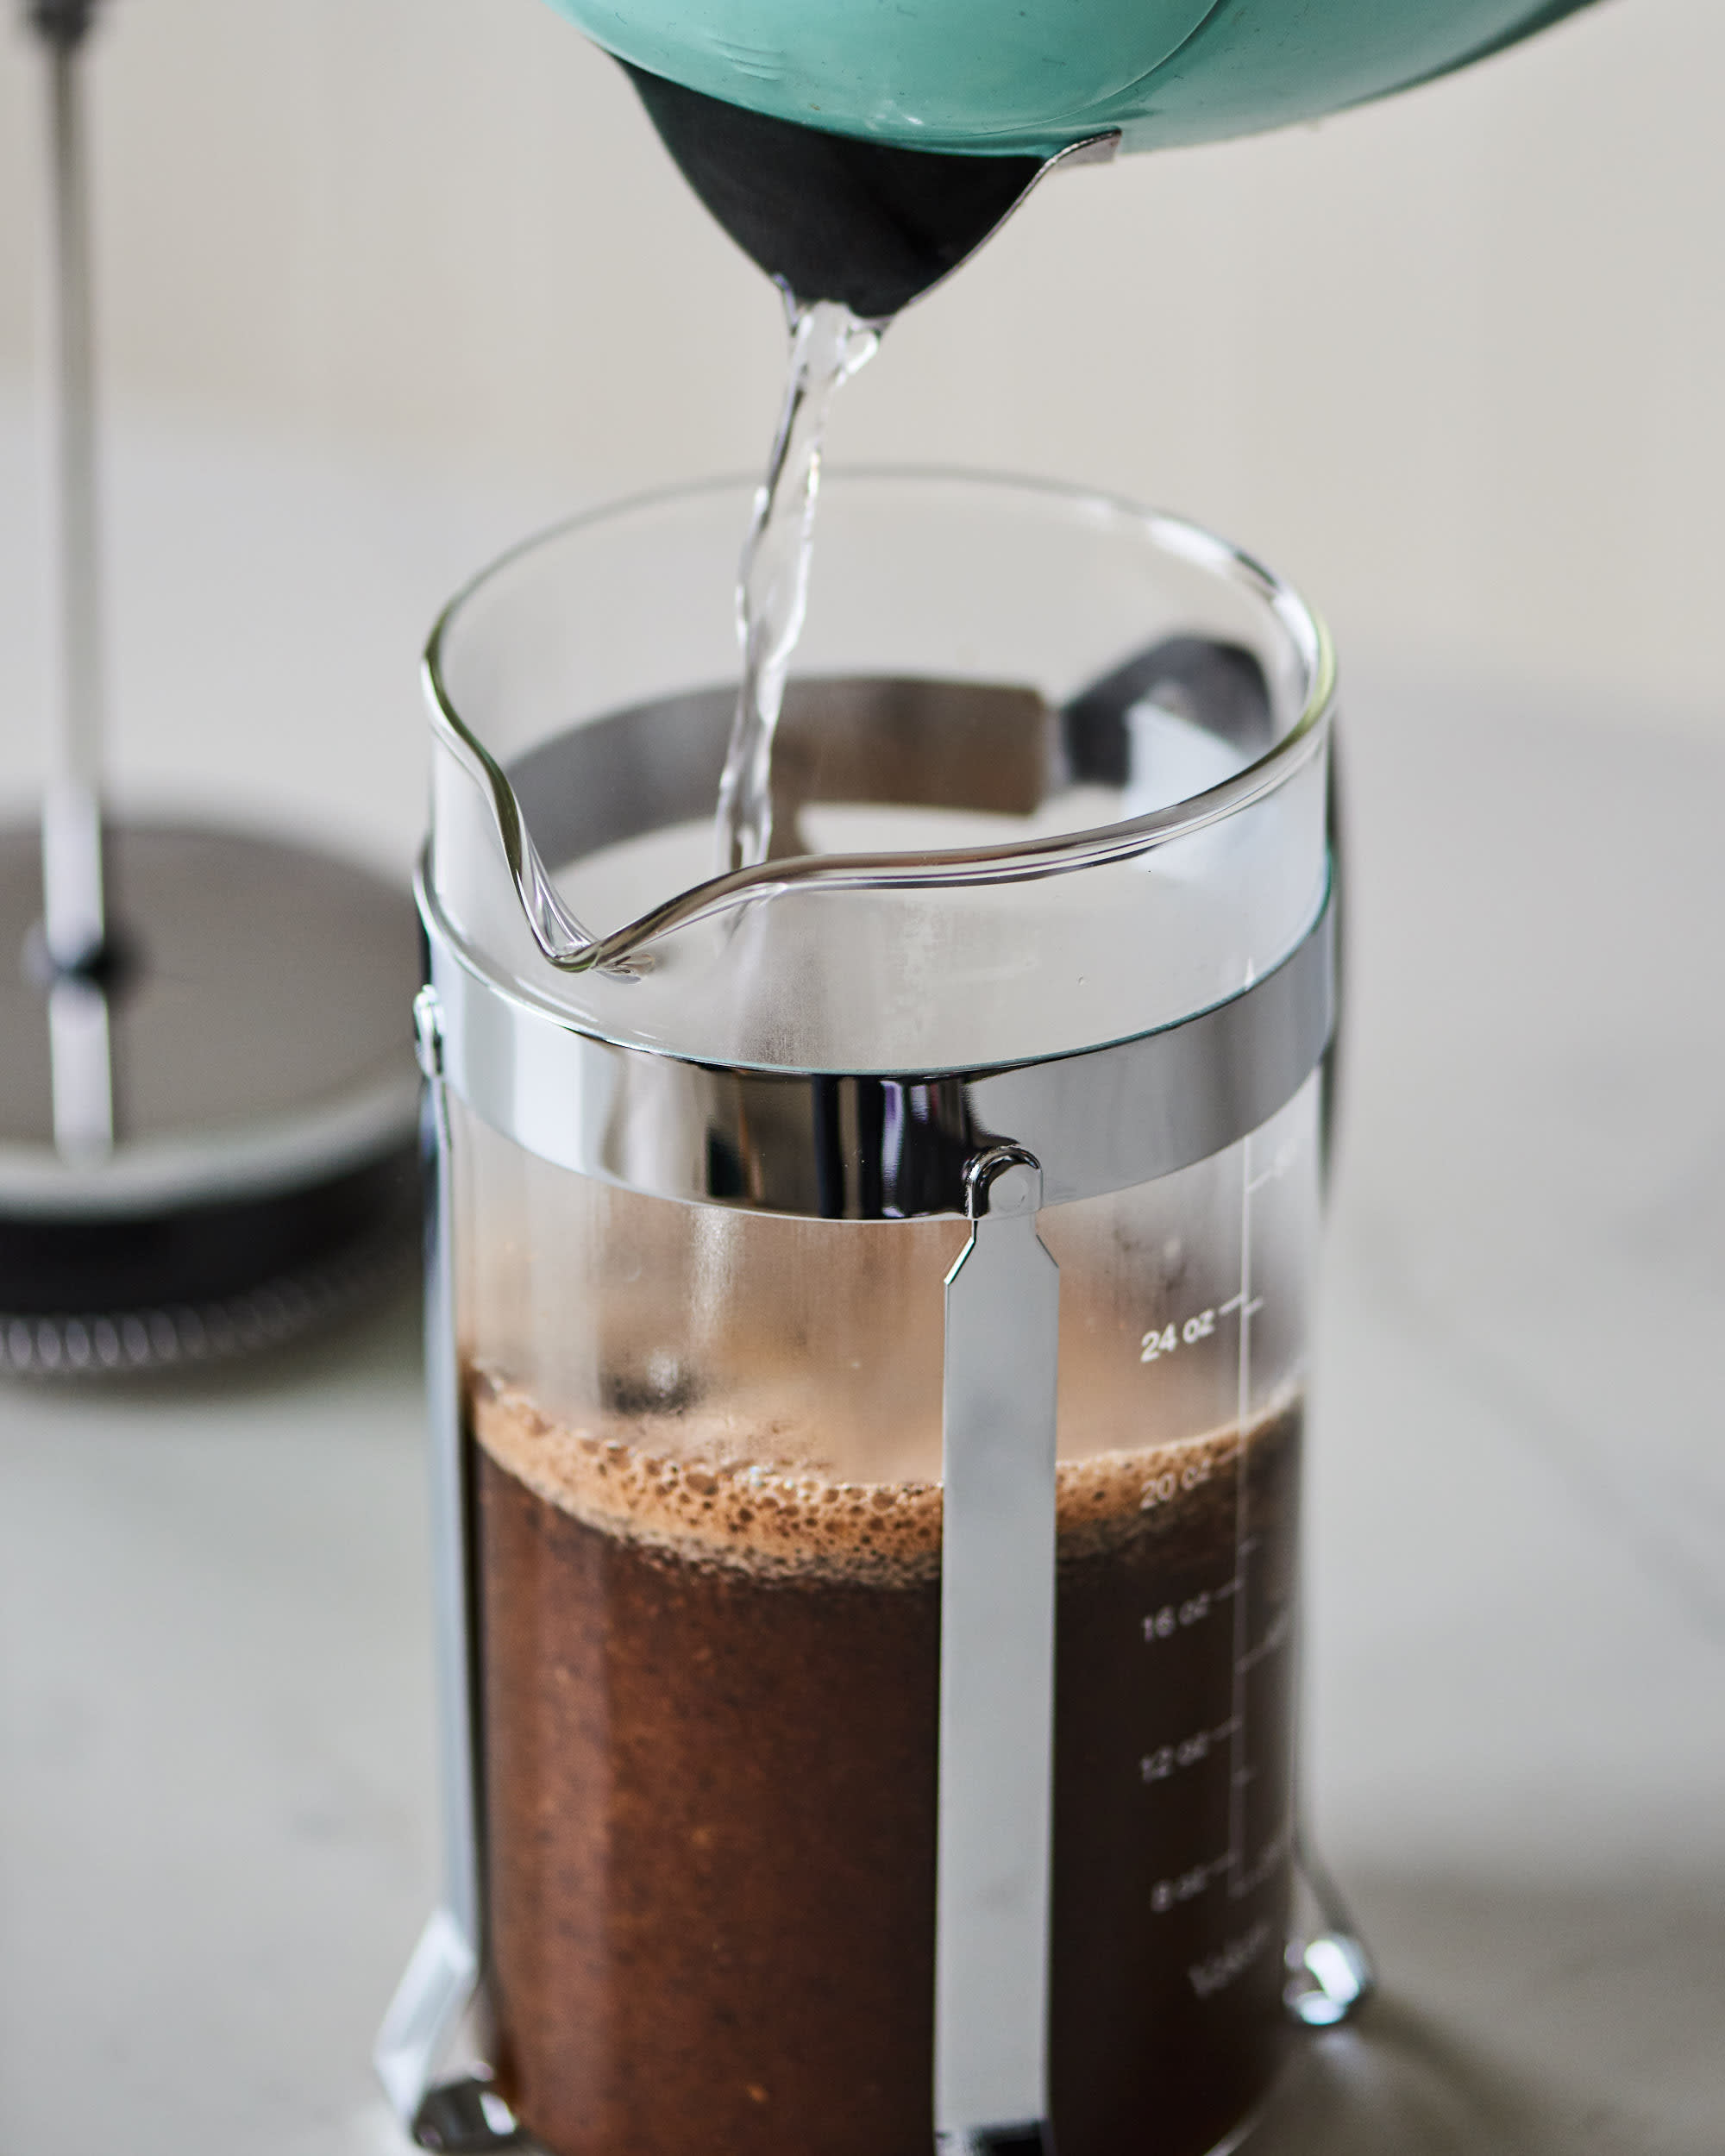 Is the iCoffee Brewer Better than French Press? - I Need Coffee